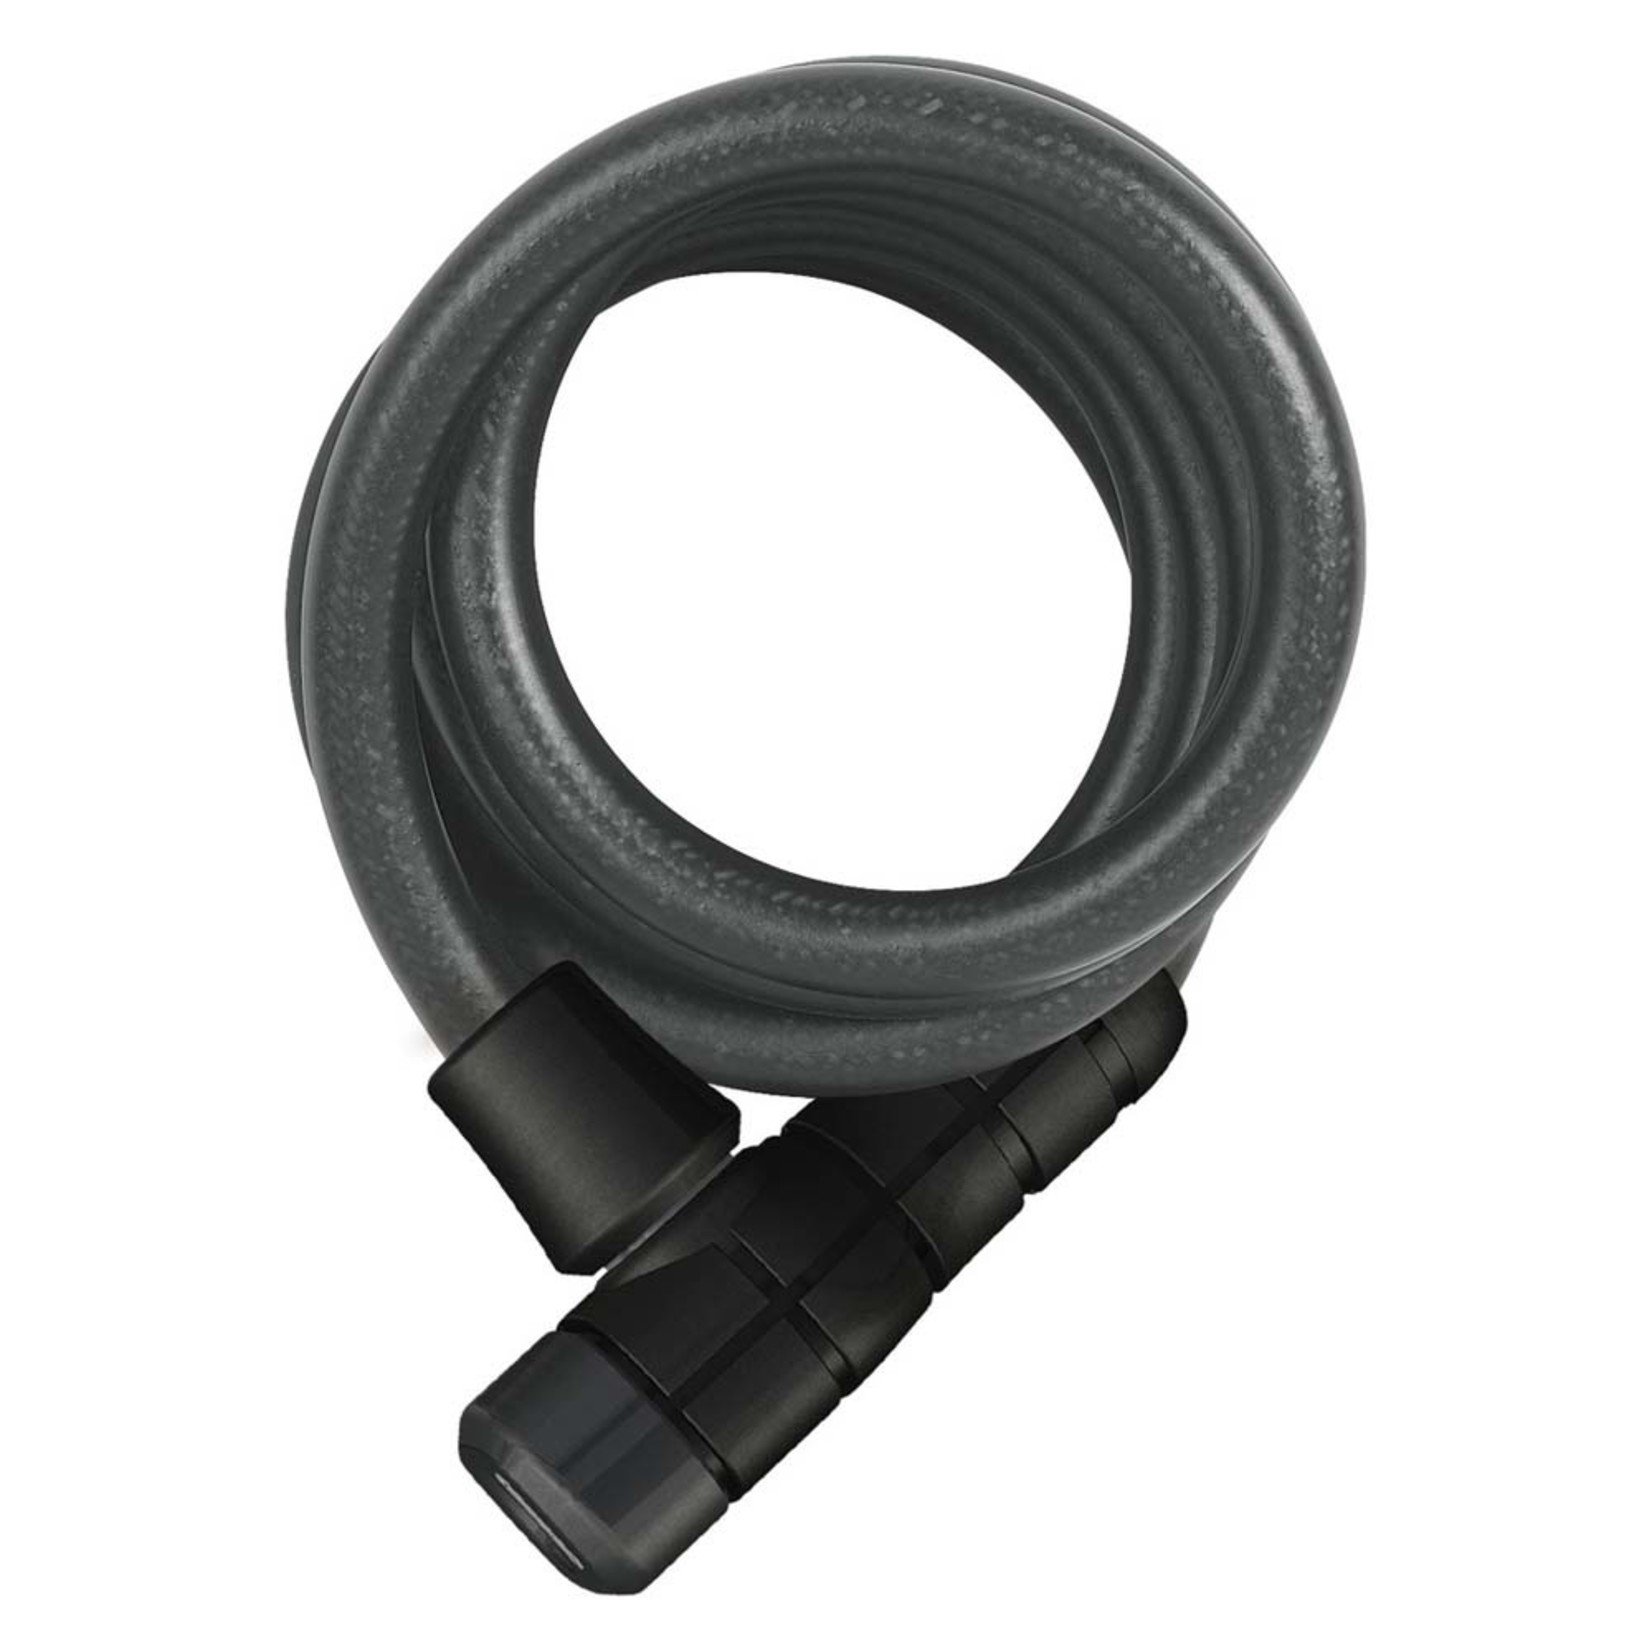 ABUS Booster 6512C Cable Serrure